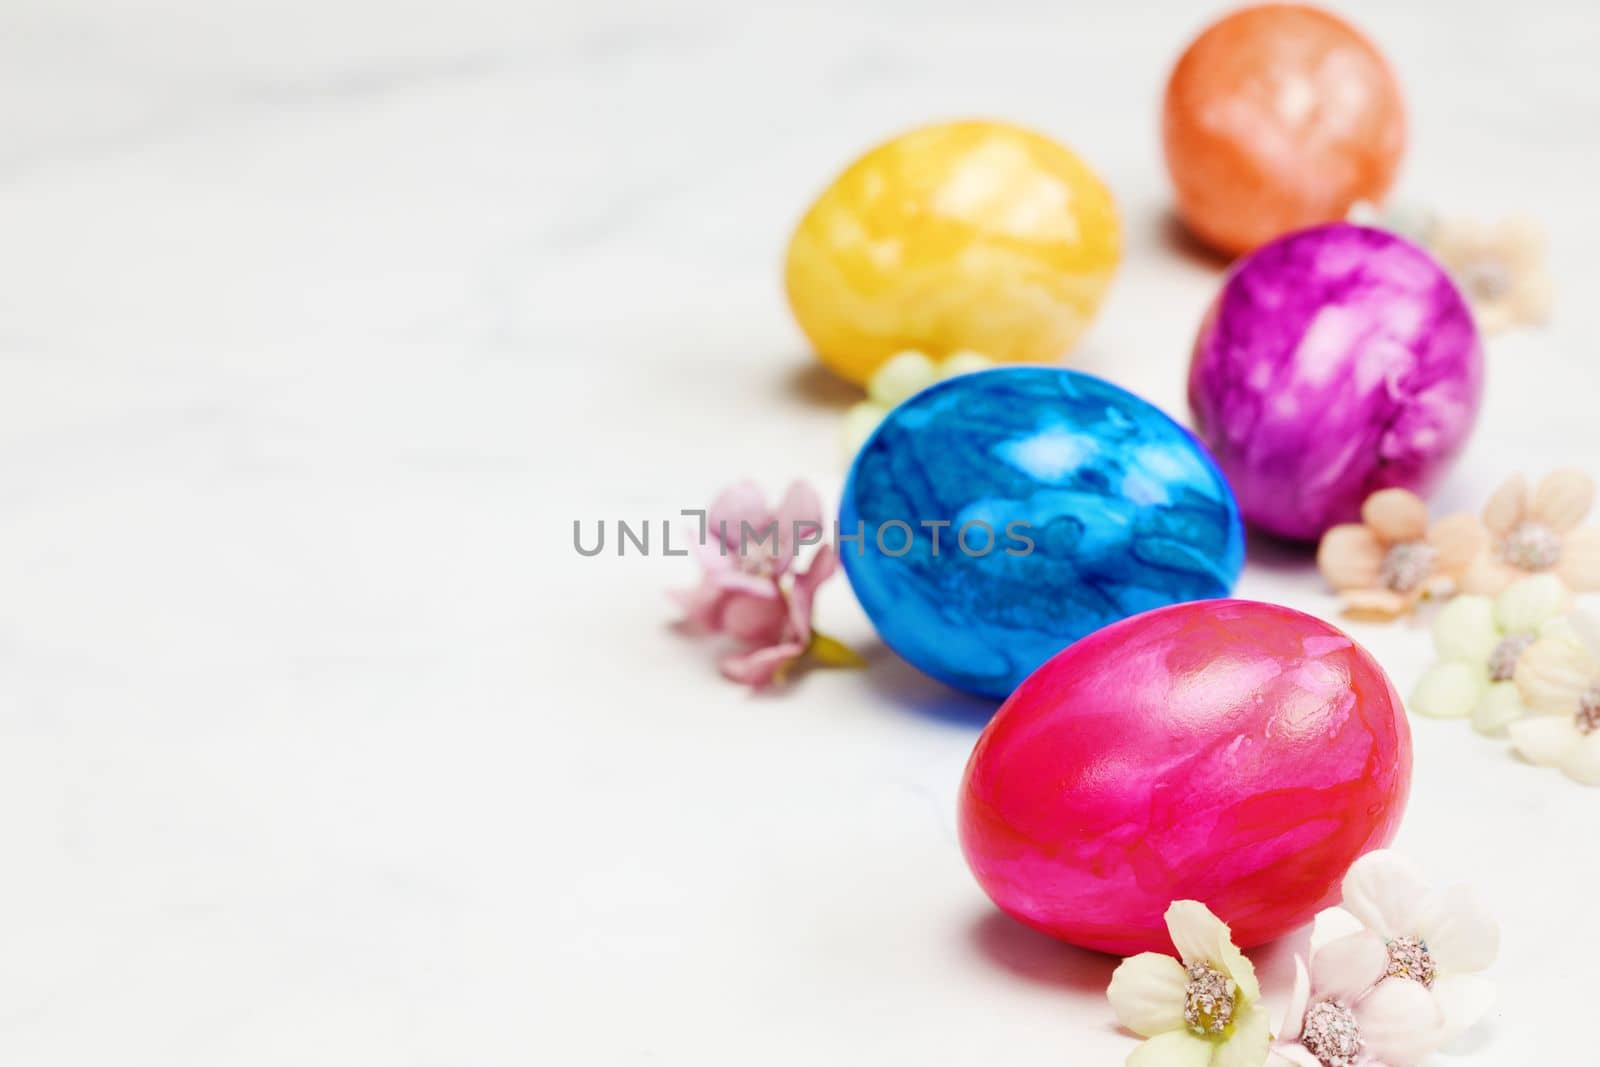 Easter eggs painted in pastel colors on a white background with copy space and cute spring flowers, Happy Easter Holiday concept with space for text. Yellow pink and blue bright colors